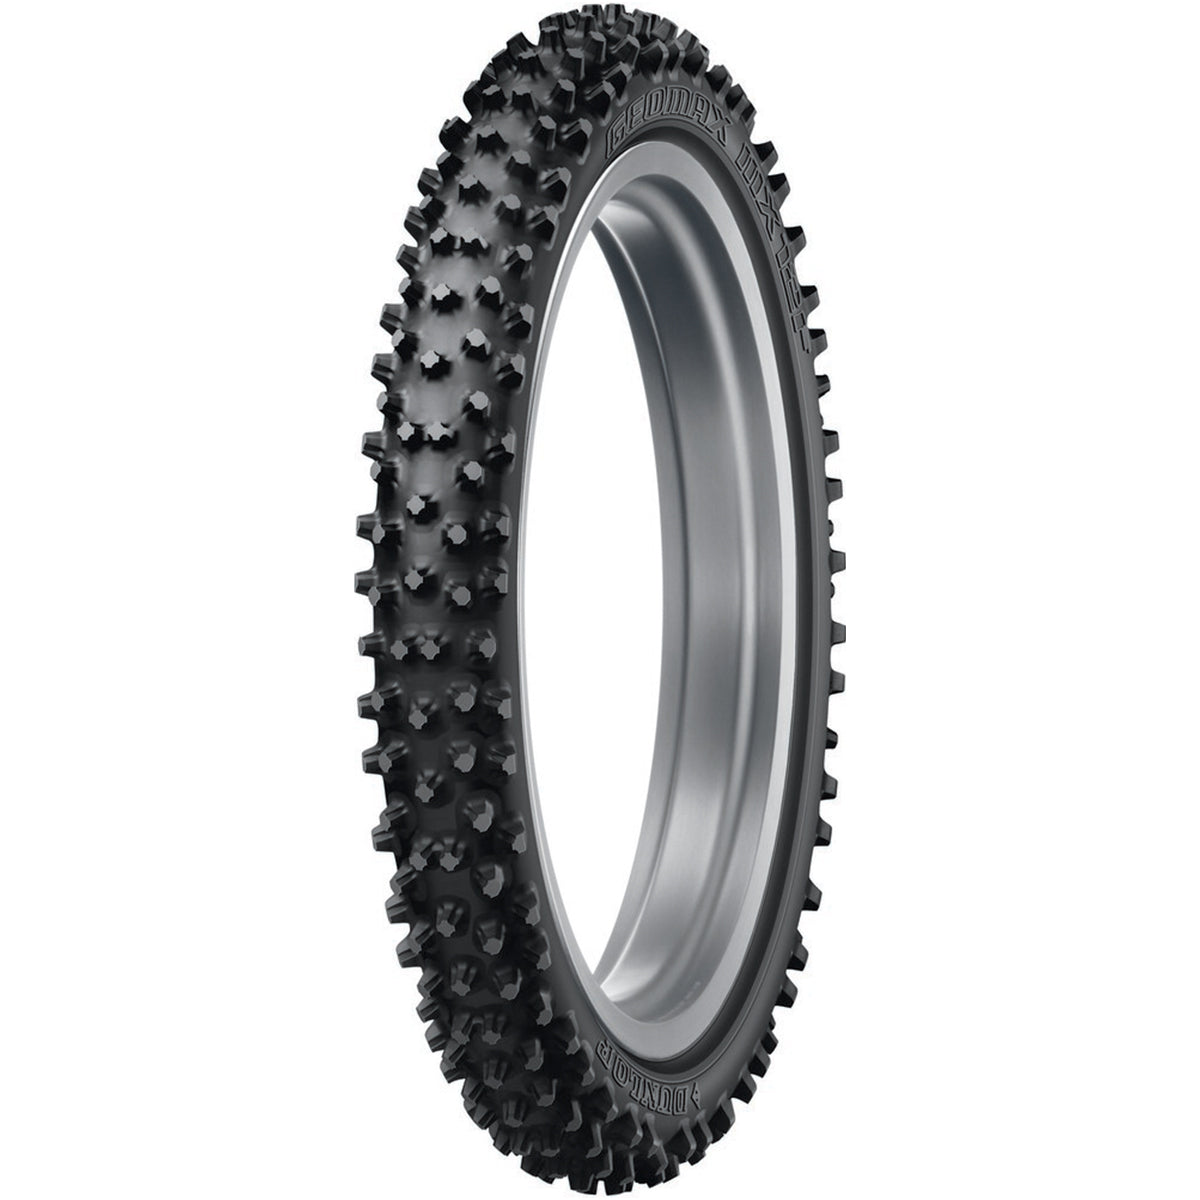 Dunlop Geomax MX53 10" Front Off-Road Tires-0312